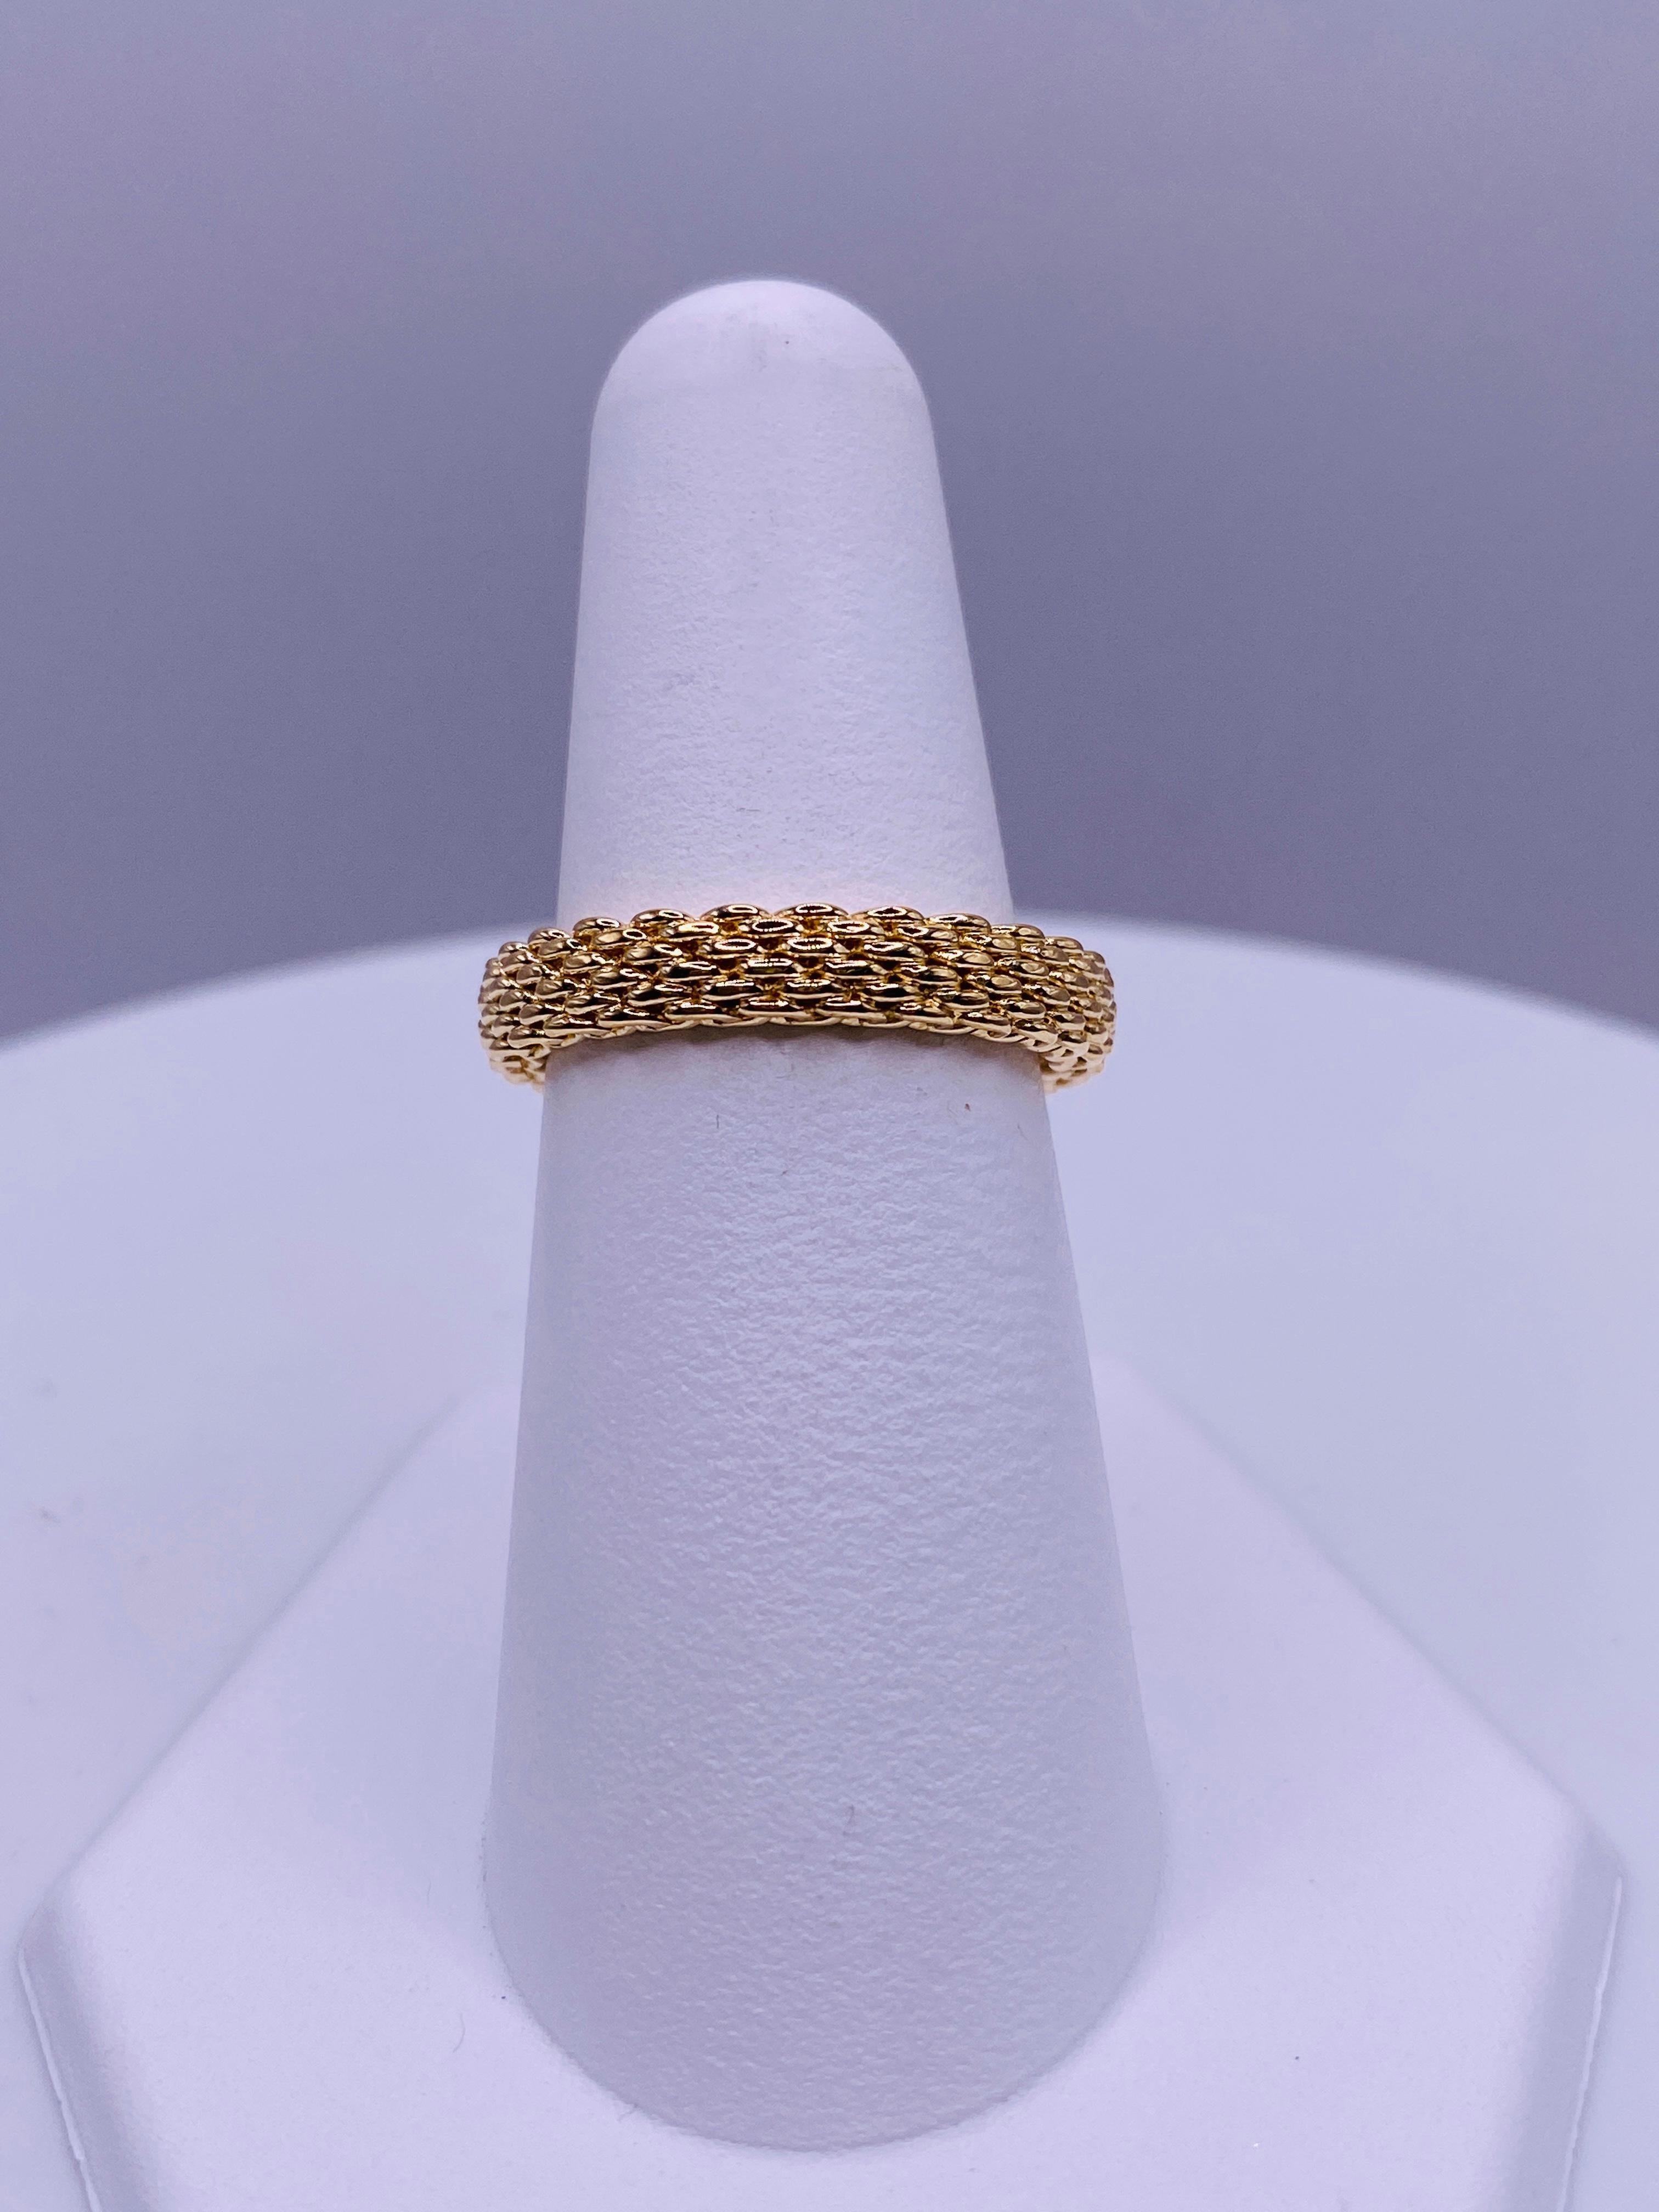 Tiffany & Co 18k Yellow Gold Somerset Ring. 2.9Dwt. Size 7